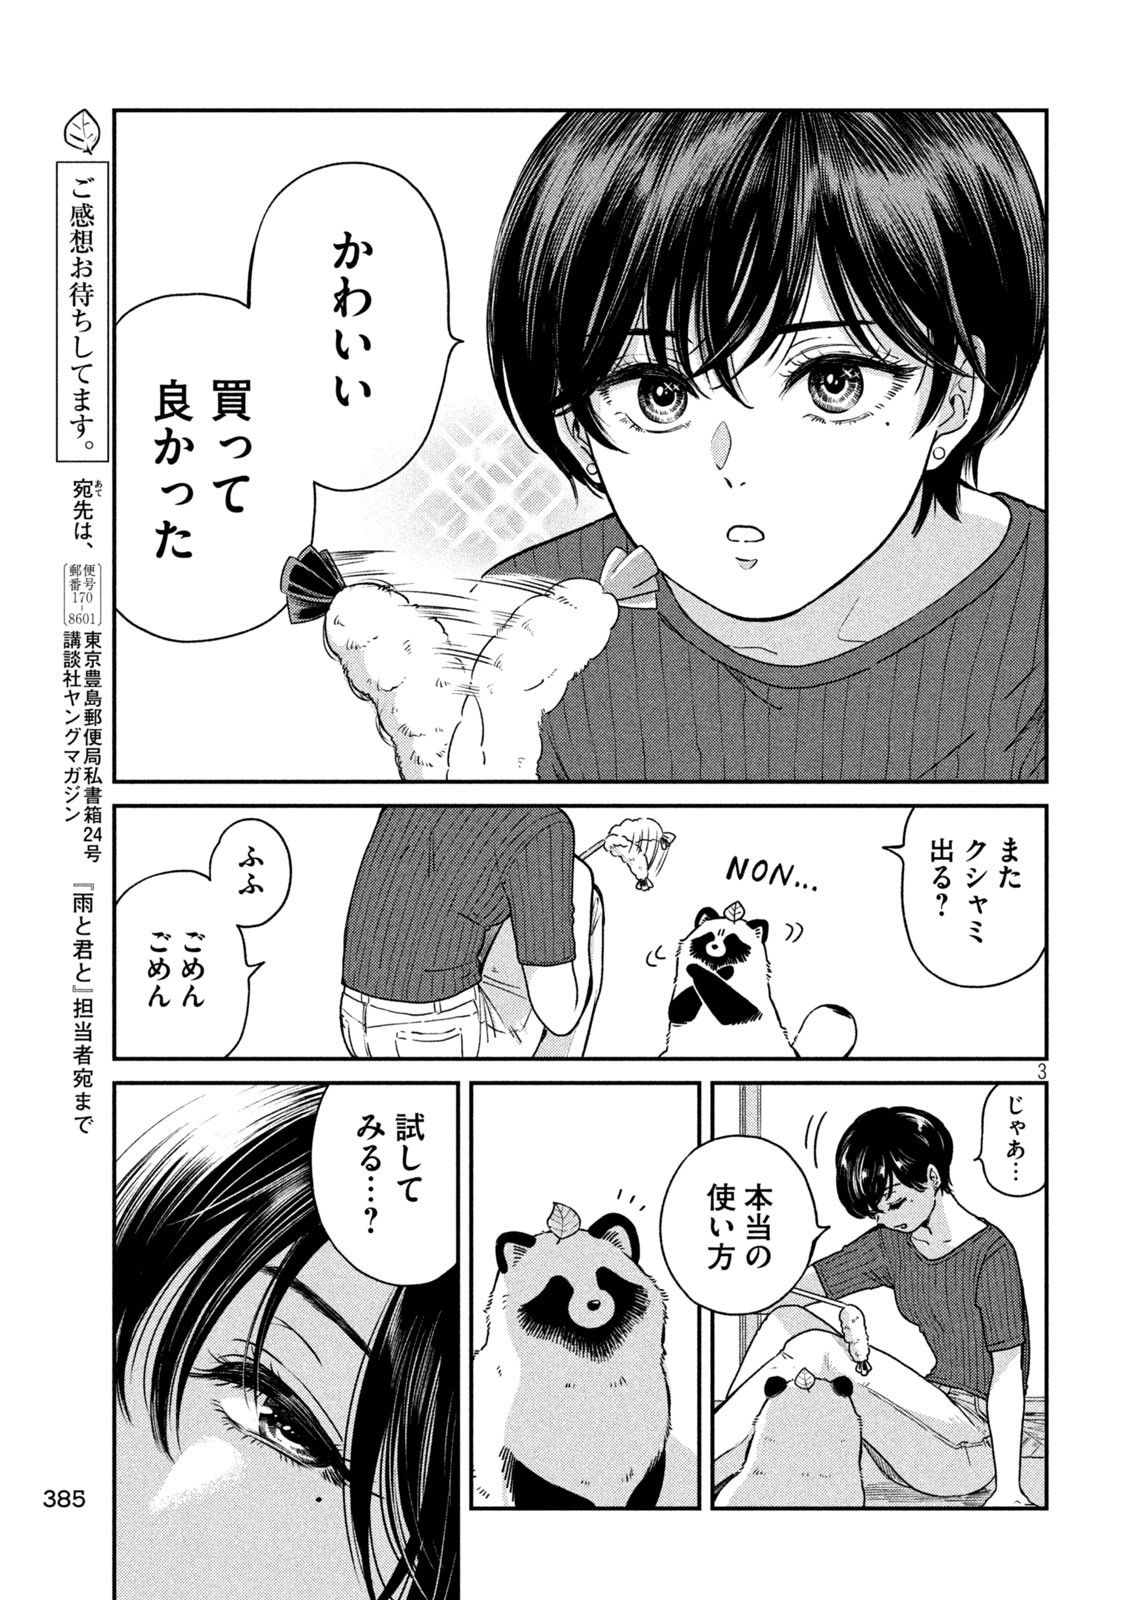 Ame to Kimi to - Chapter 102 - Page 3